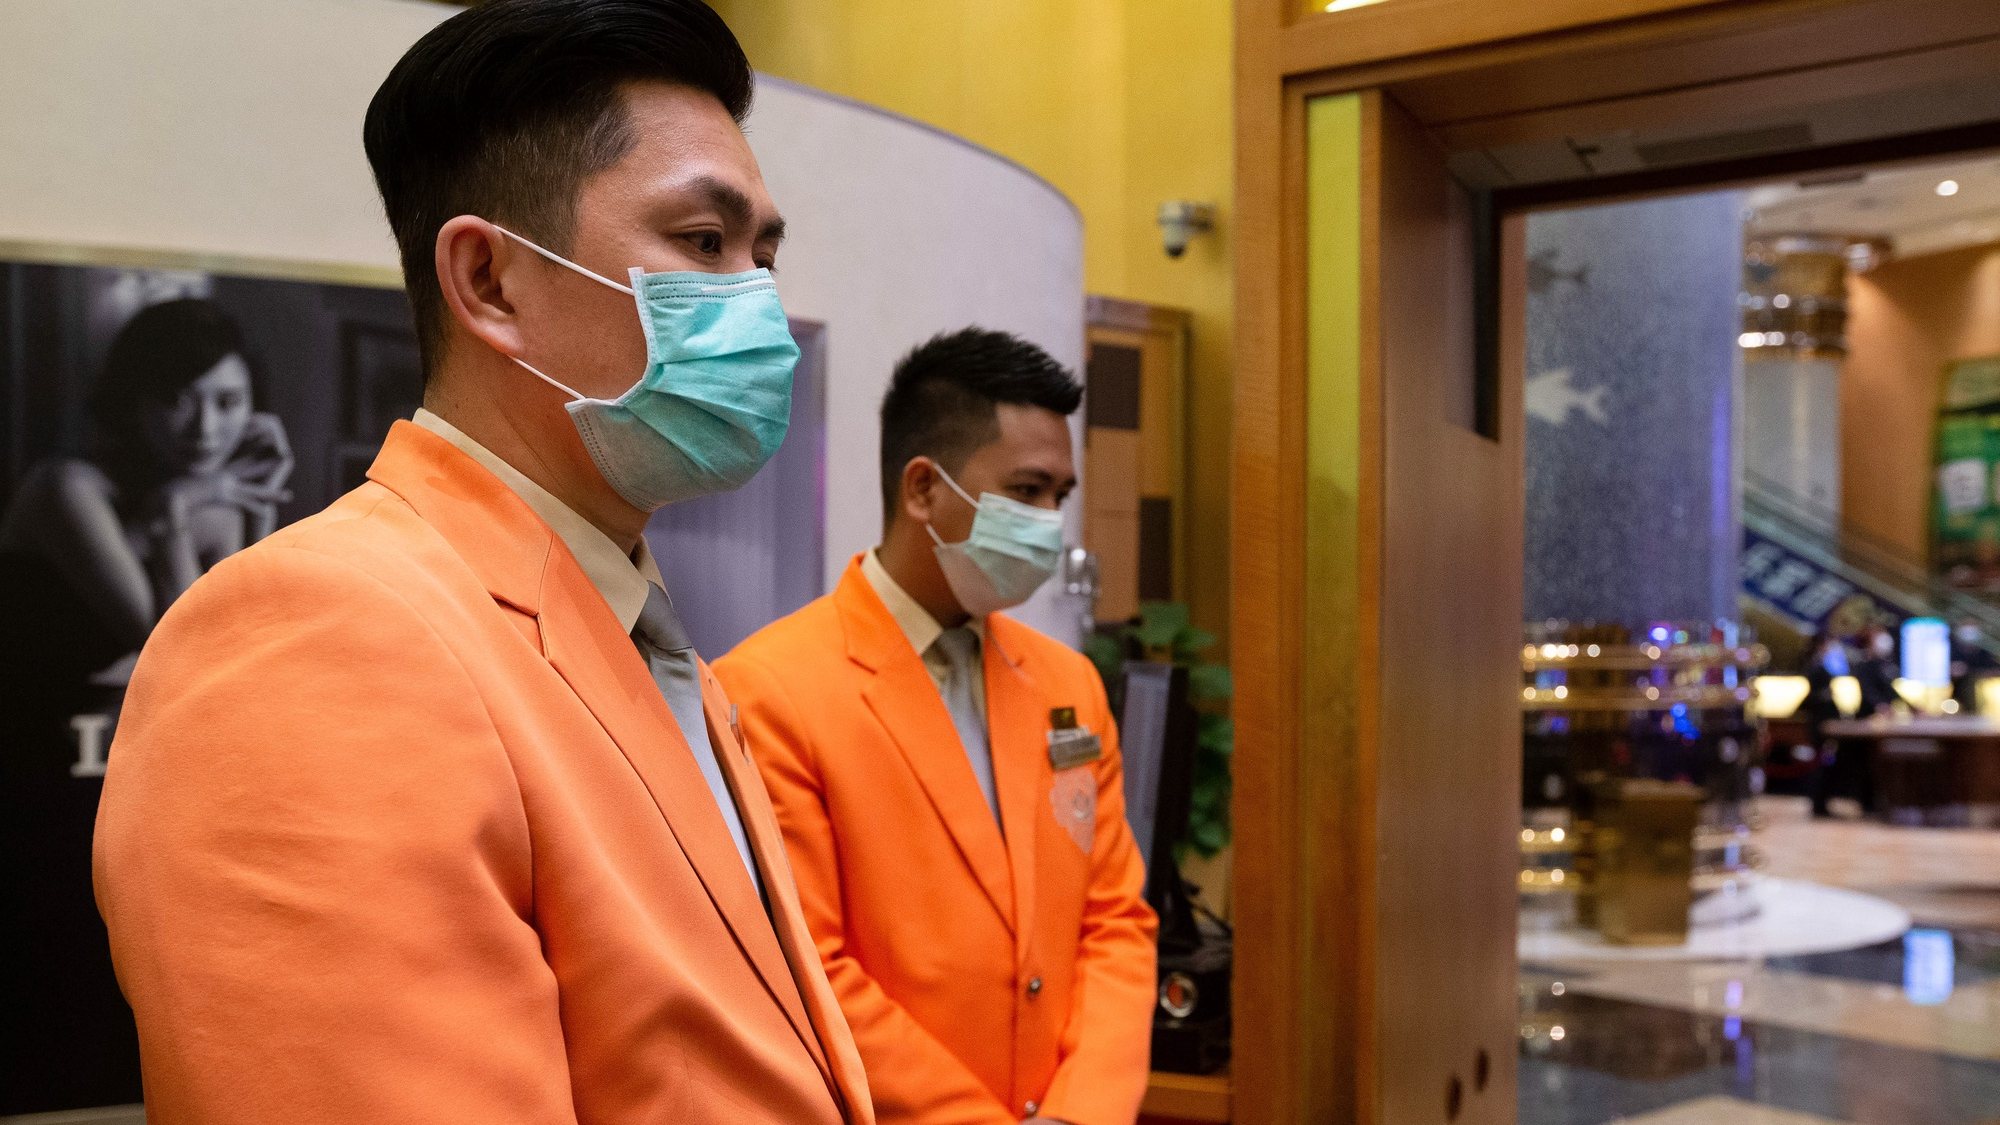 epa08228738 Casino workers wearing protective masks await customers as the Casino reopens in Macao, China, 20 February 2020. Twenty-nine casinos are to reopen starting 20 February, and 12 remain closed, the authorities of the gambling capital said, one of the regions that have identified cases of infection by the coronavirus Covid-19.  After 15 days of closure, Macau&#039;s government said on 17 February that the casinos could reopen, giving operators 30 days to return to business.  EPA/CARMO CORREIA